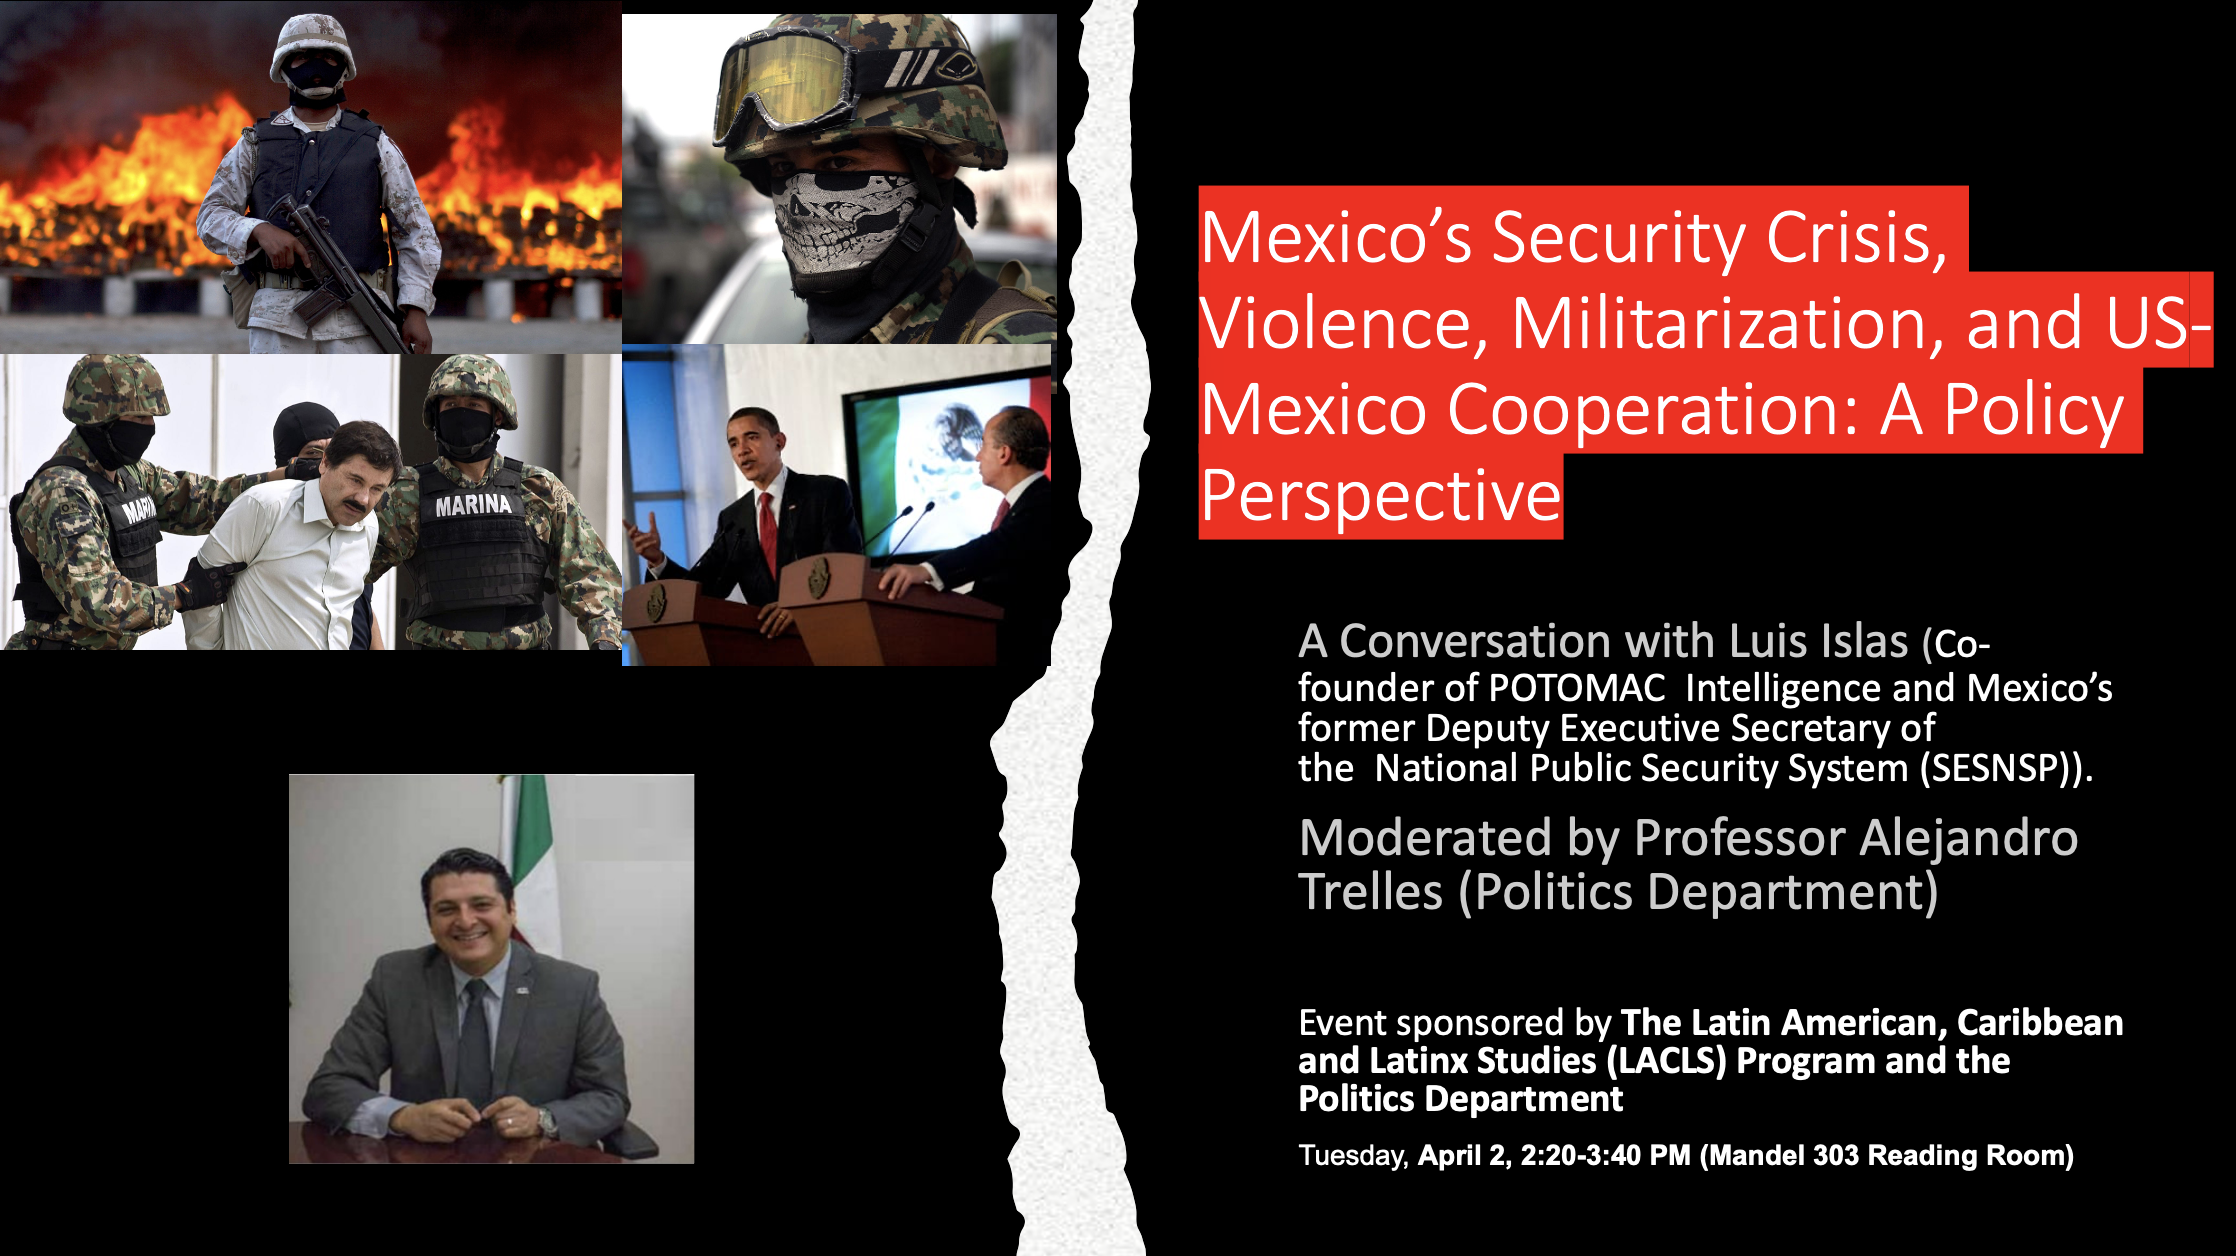 US-Mexico cooperation